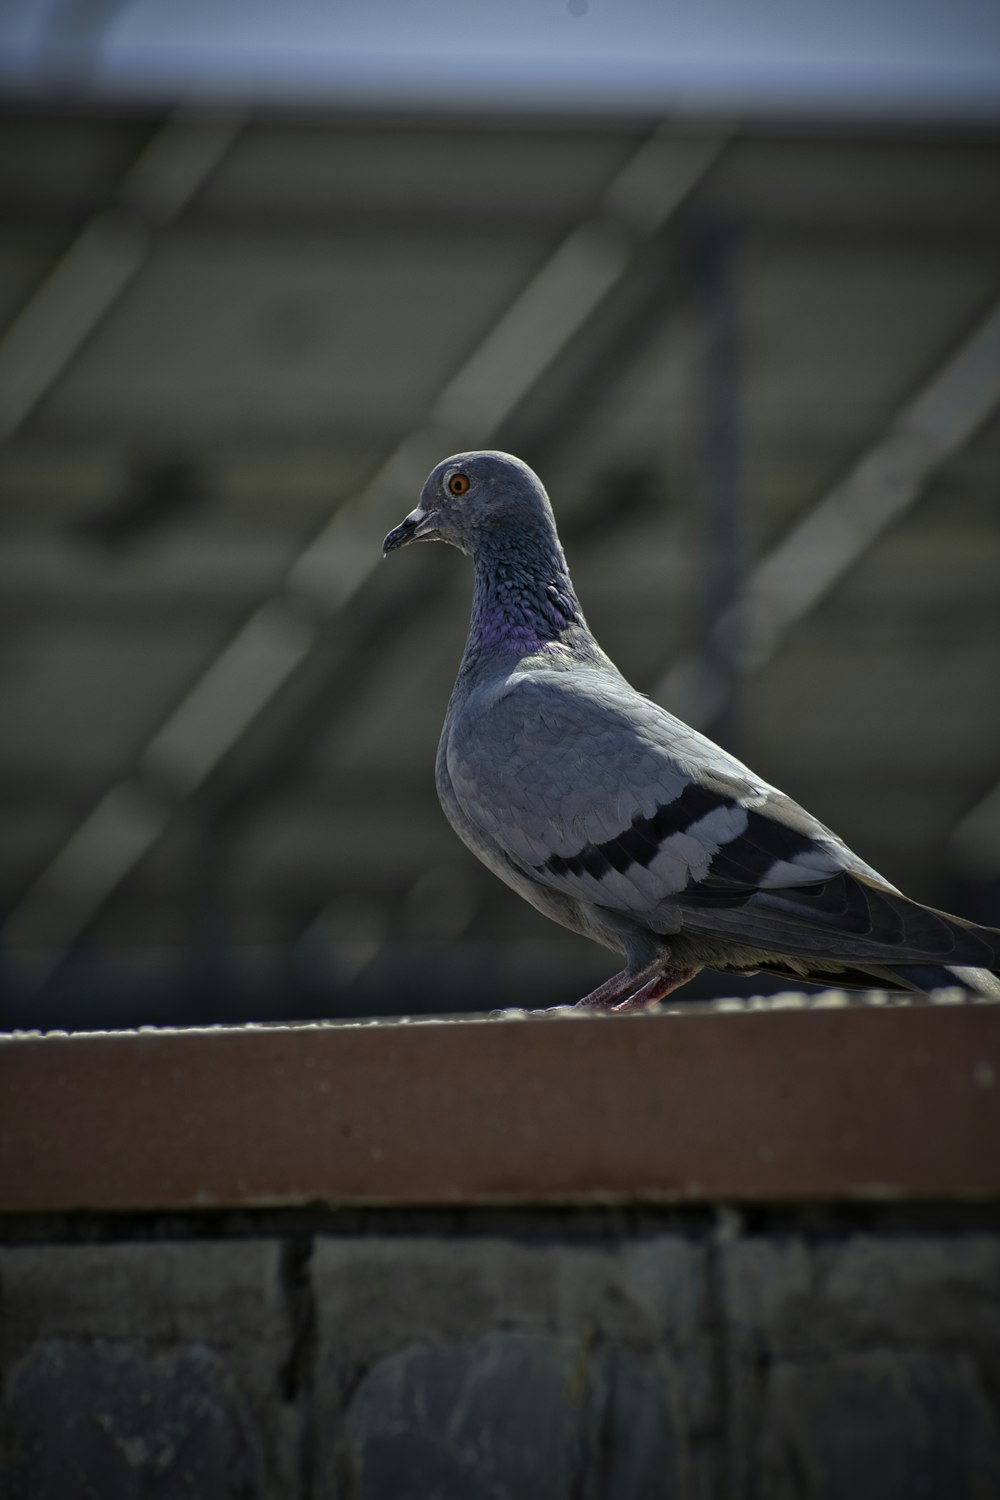 a pigeon sitting on top of a wooden ledge